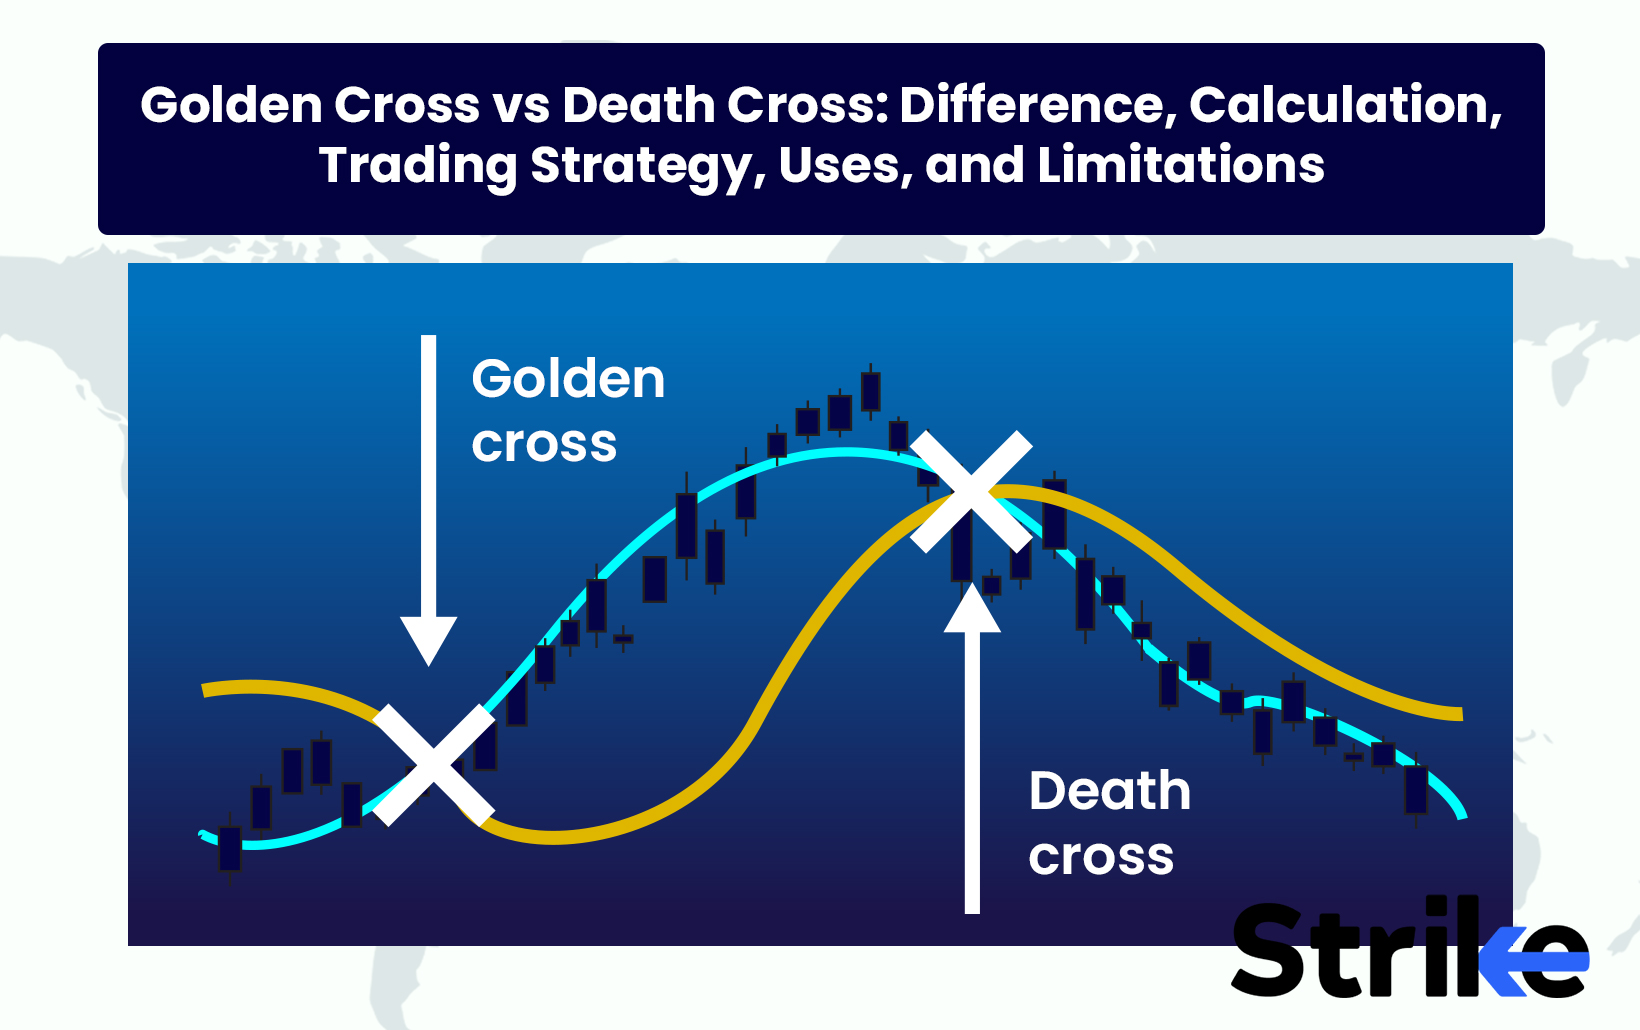 Golden Cross vs Death Cross: Difference, Calculation, Trading Strategy, Uses, and Limitations